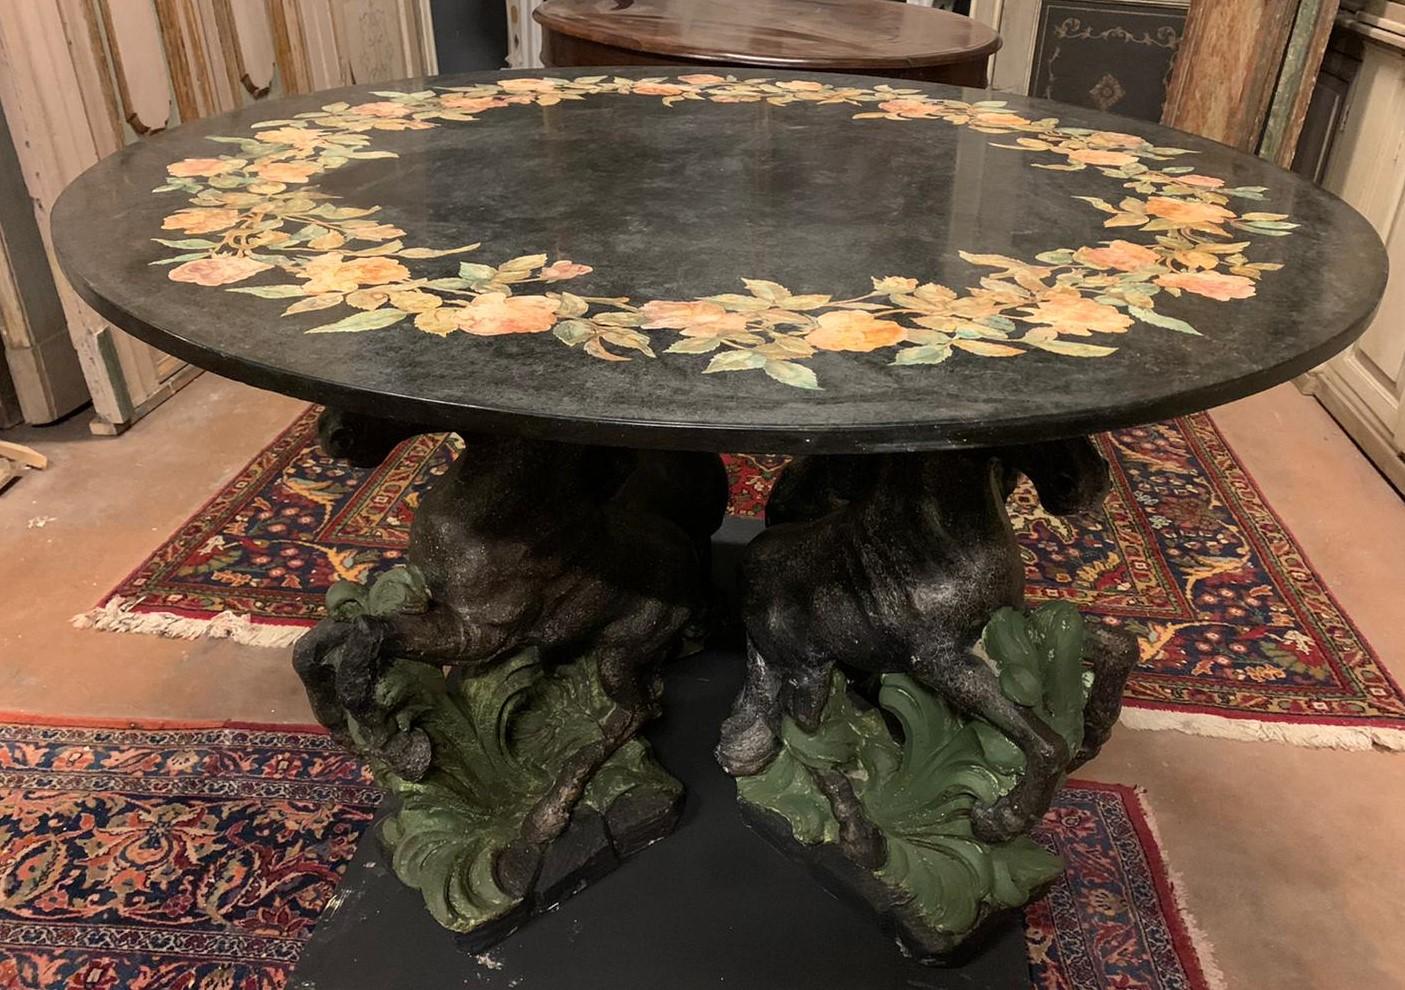 Vintage Black Scagliola Table with Four Sculpted Horses at the Base, '900 Italy For Sale 3